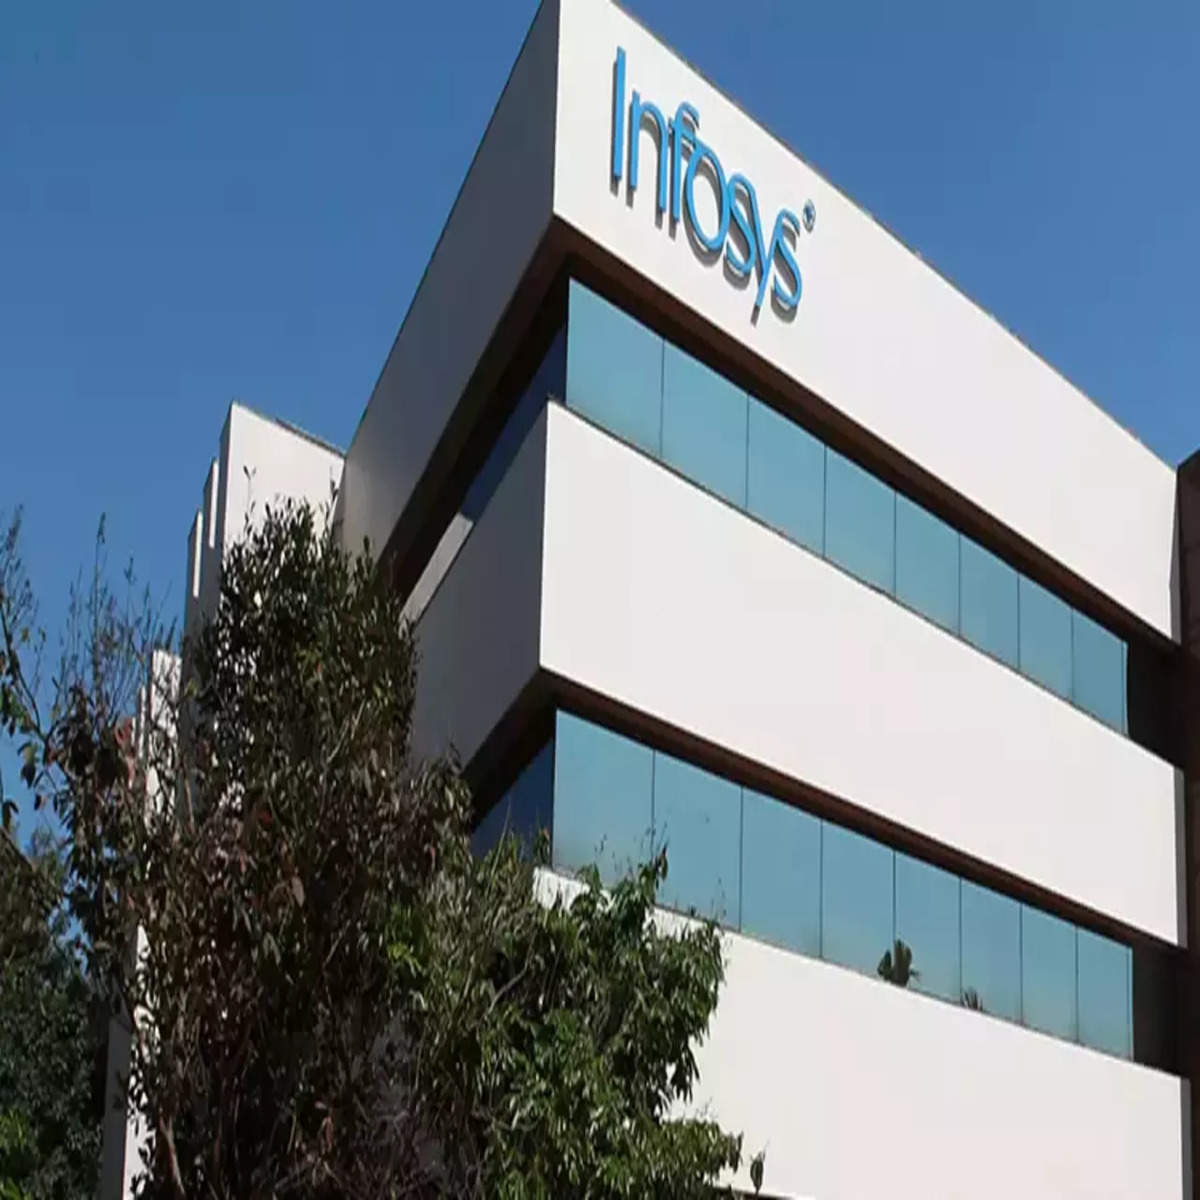 #Infosys Q4 NET PROFIT IS UP by 30% with the least headcount compare to FY23 

A Thread🧵: